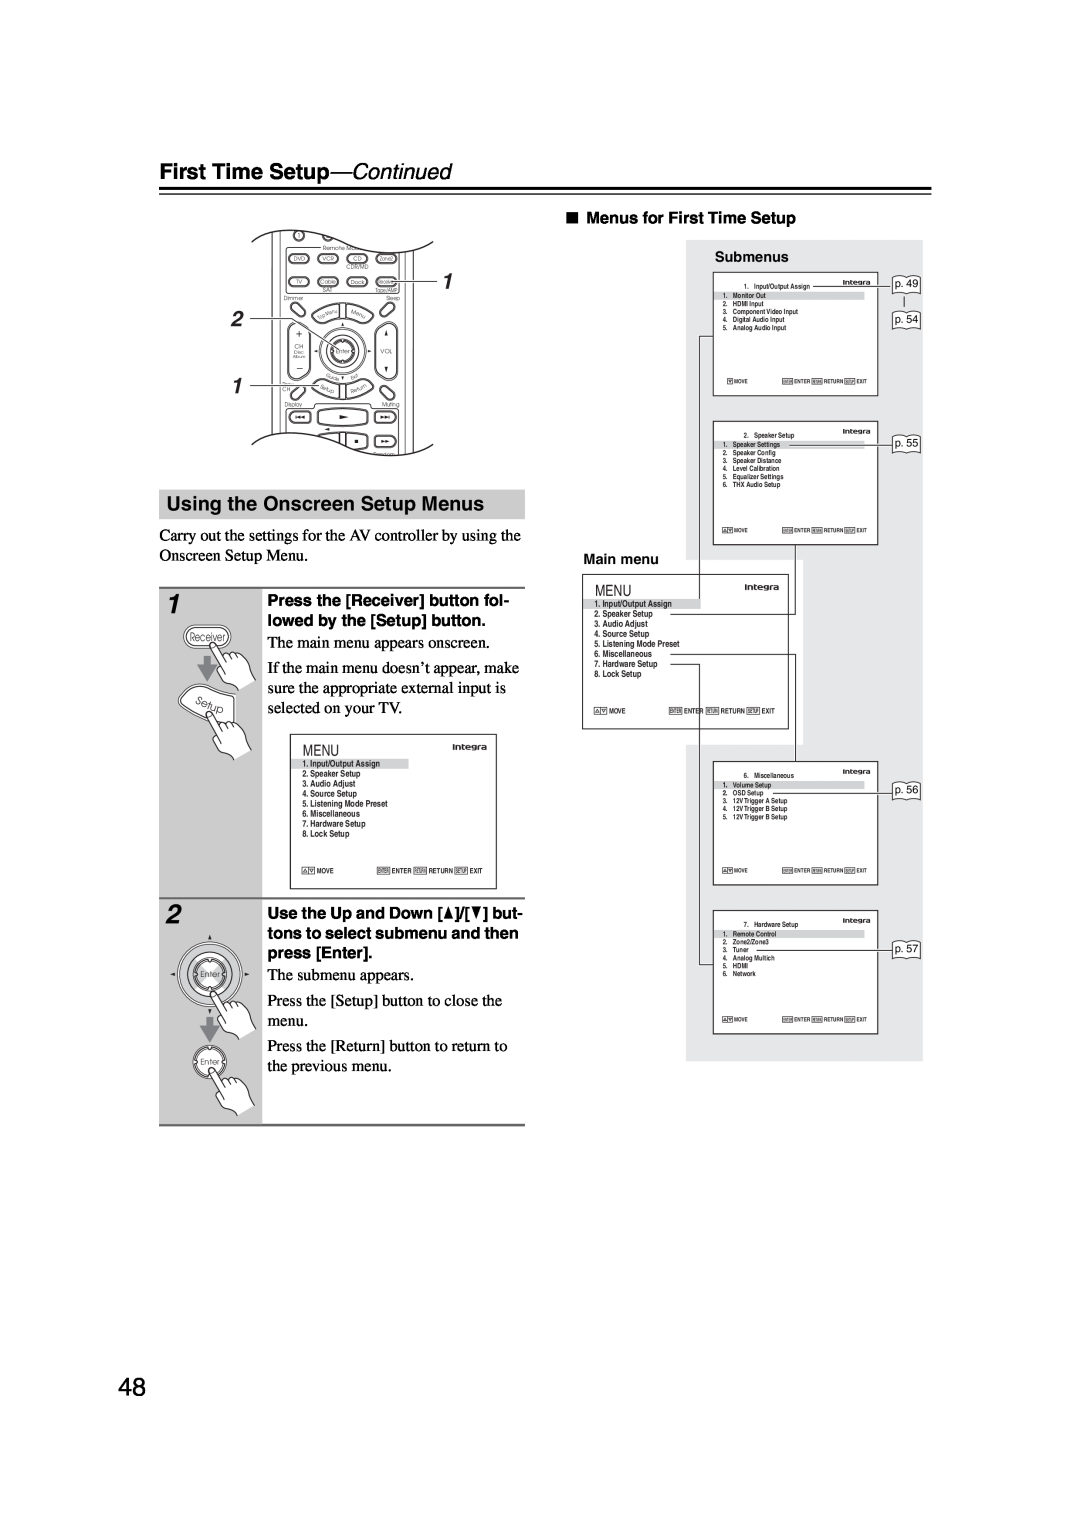 Integra DHC-9.9 instruction manual Using the Onscreen Setup Menus, First Time Setup—Continued 